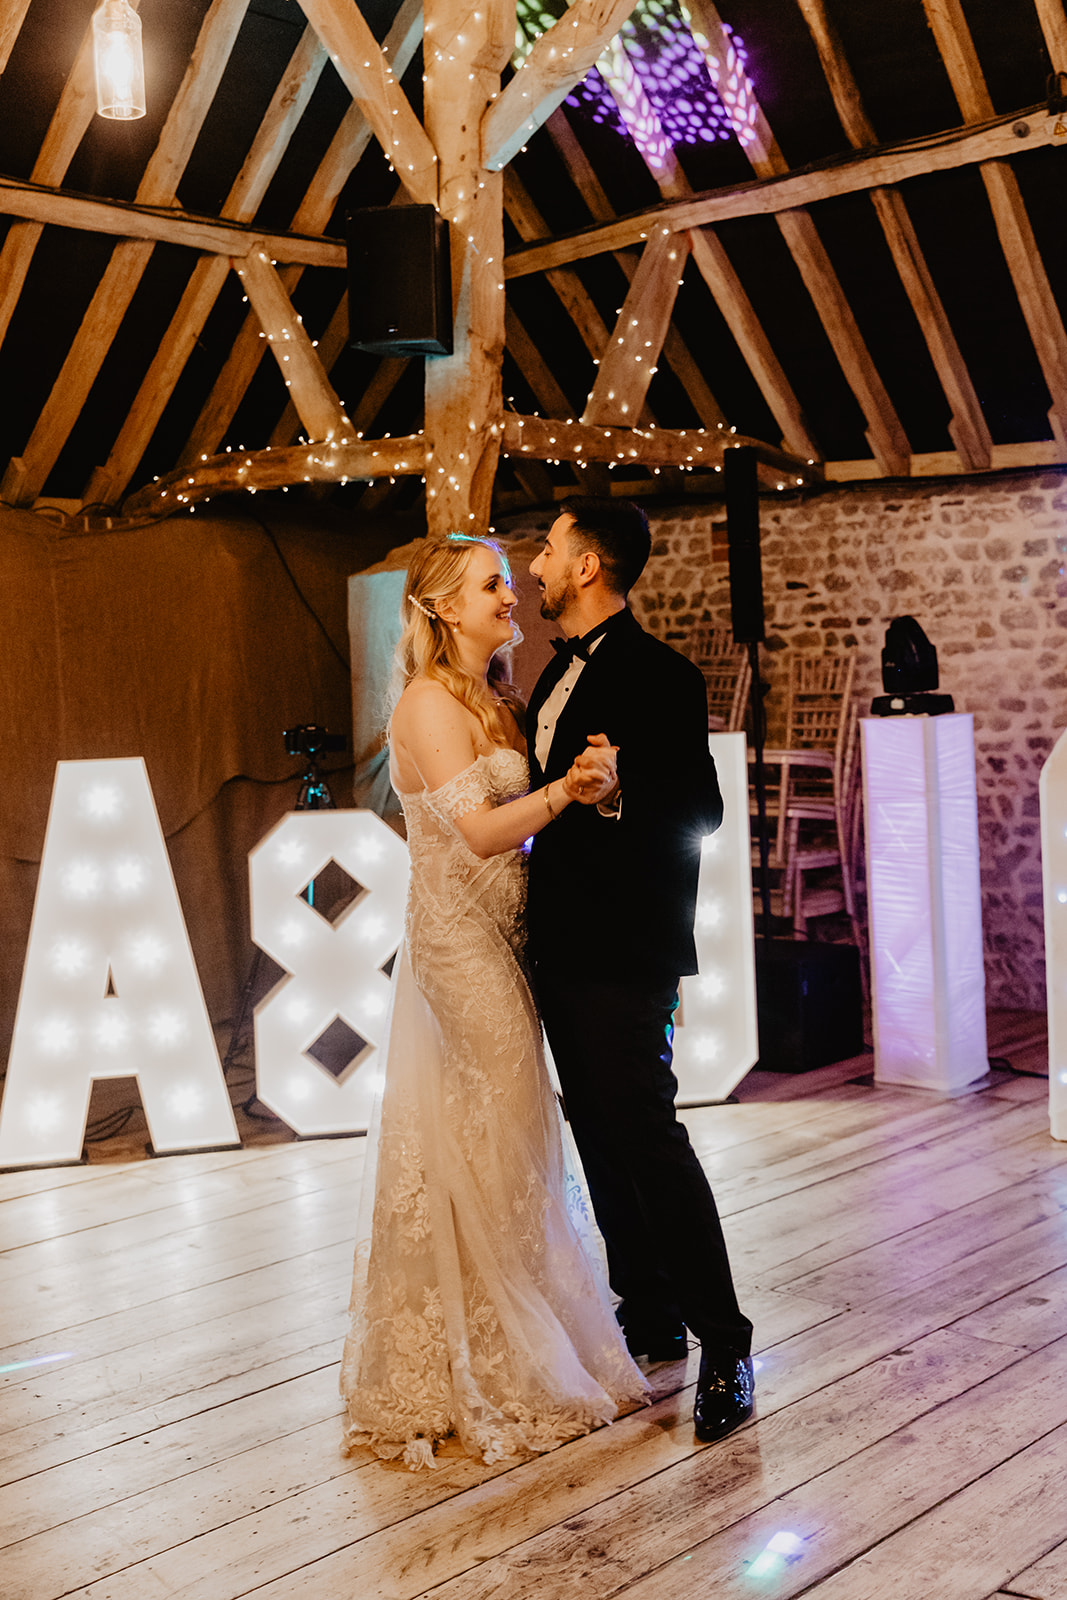 Bride and groom first dance at a Southlands barn wedding, Sussex. Photo by OliveJoy Photography.